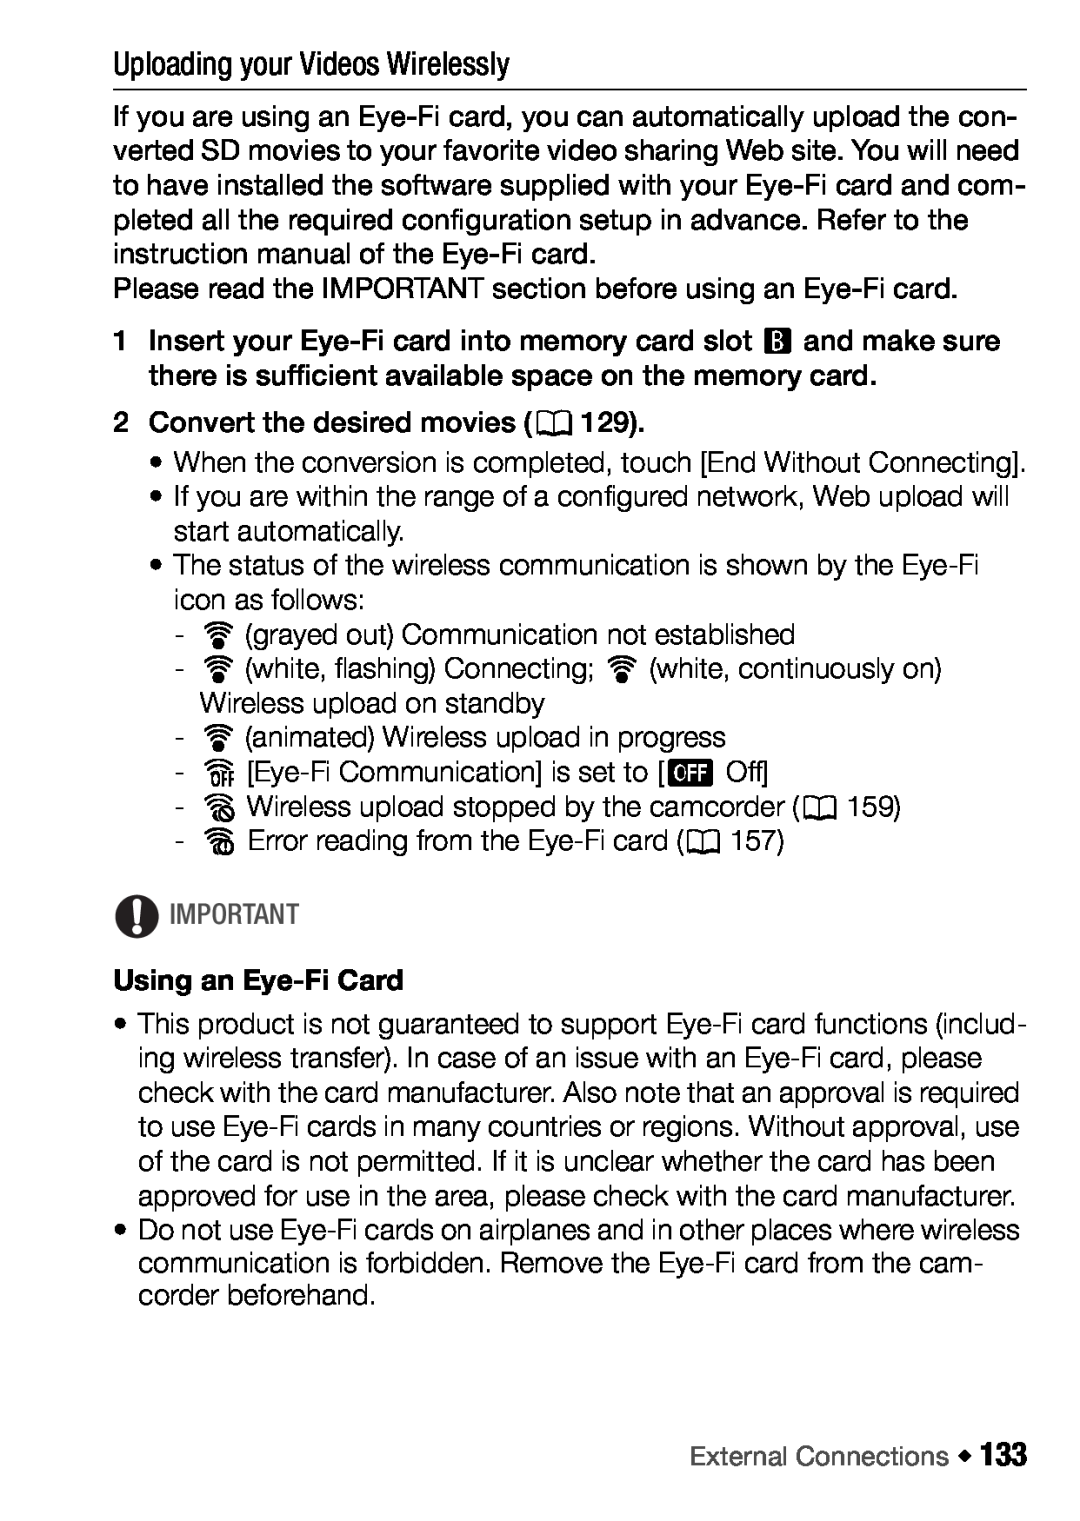 Canon HFM46, HFM406 instruction manual Uploading your Videos Wirelessly, Using an Eye-Fi Card 